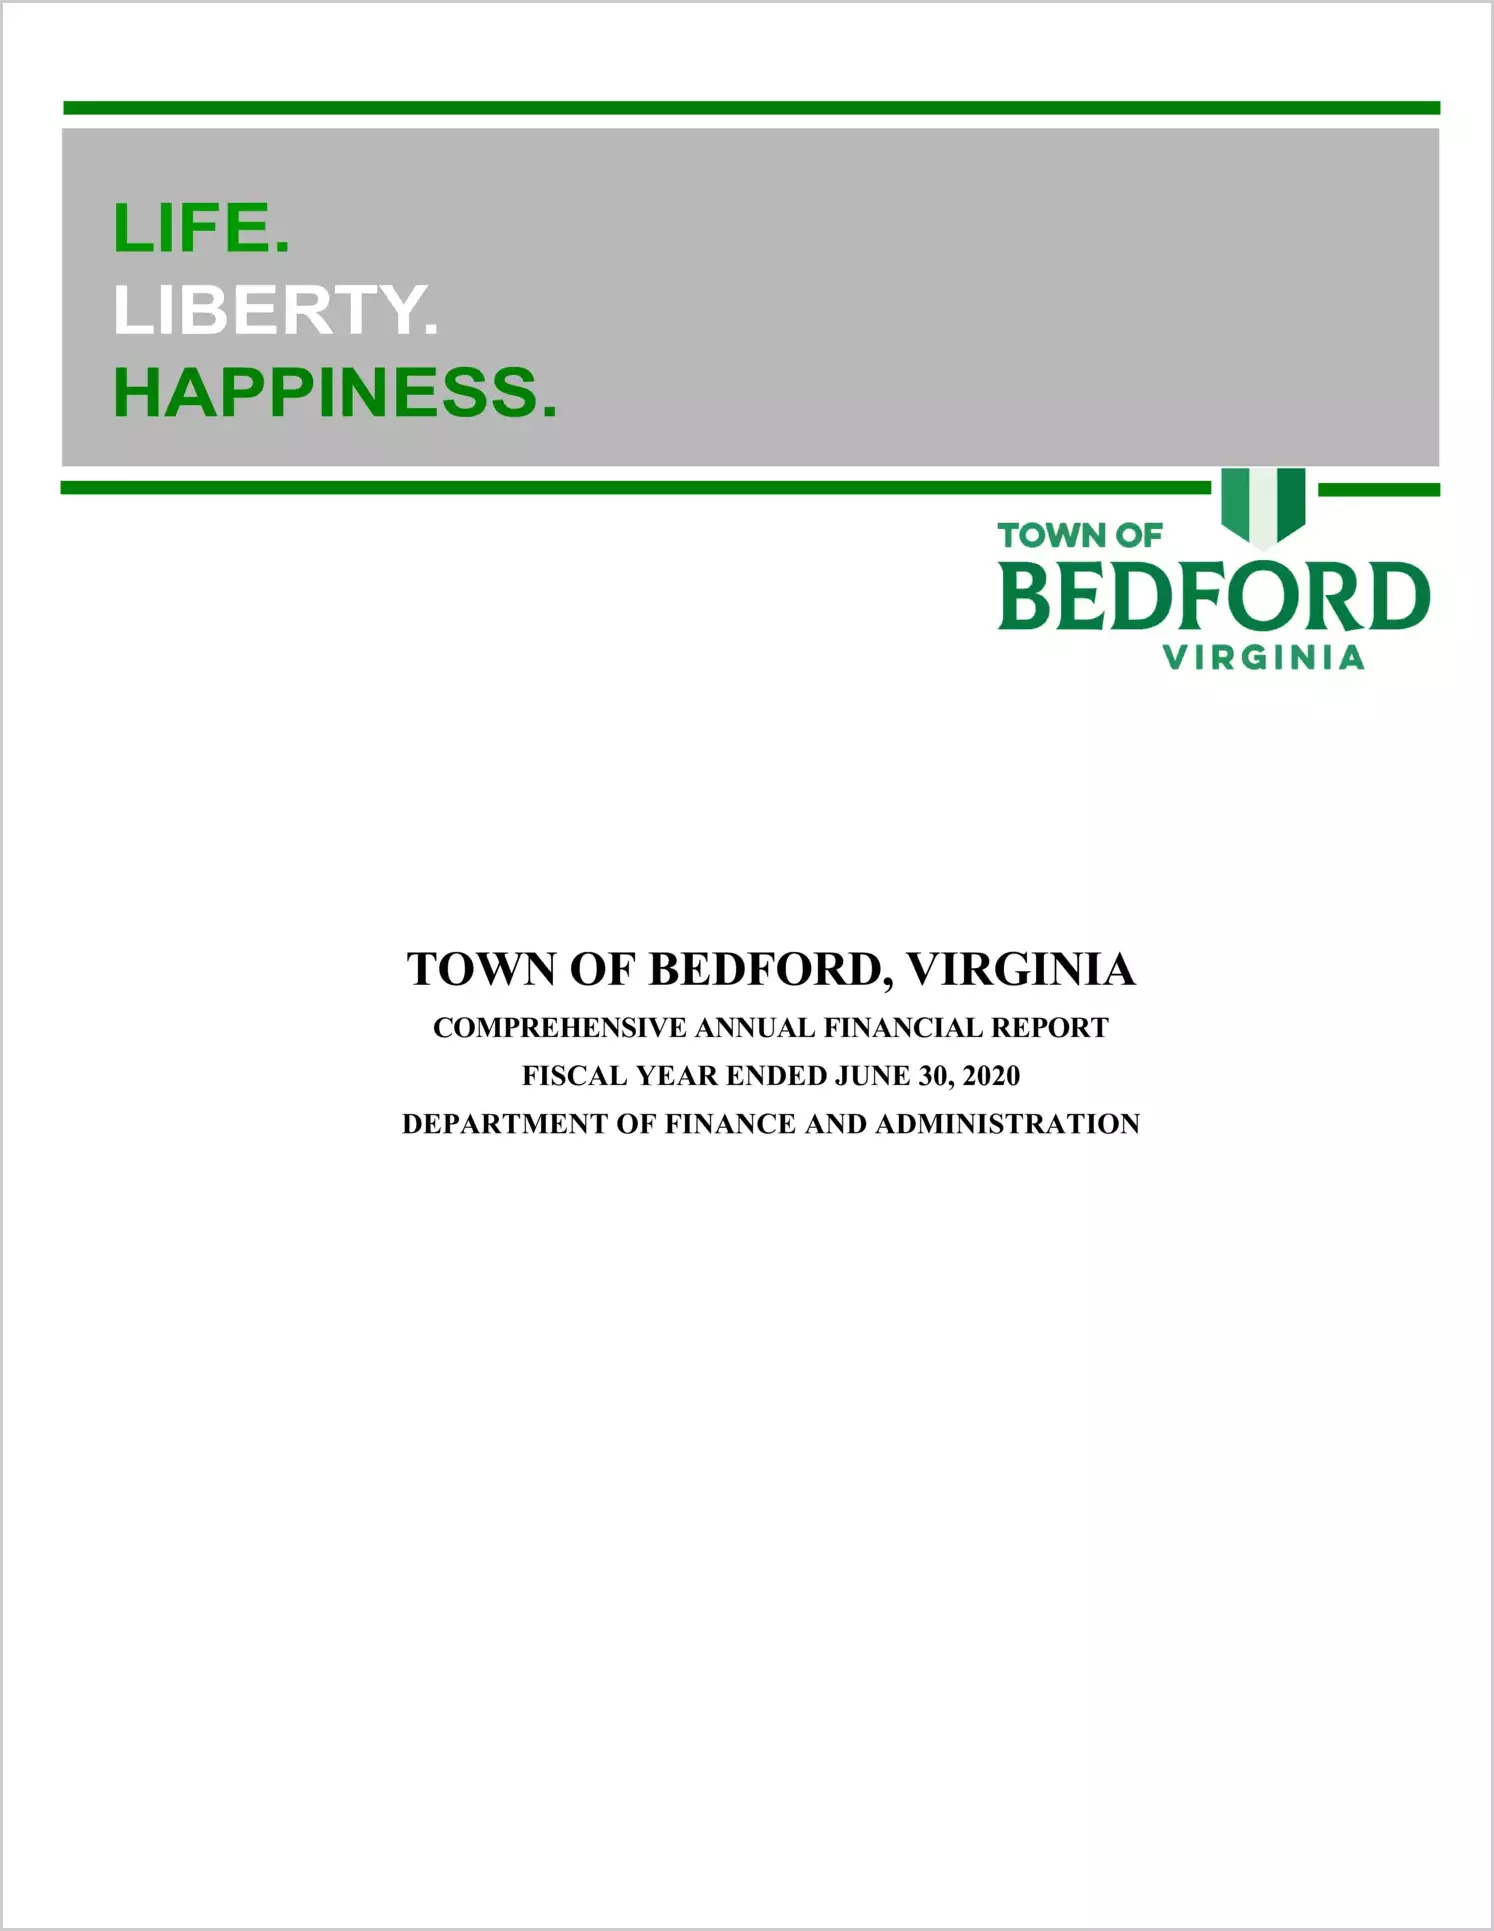 2020 Annual Financial Report for Town of Bedford